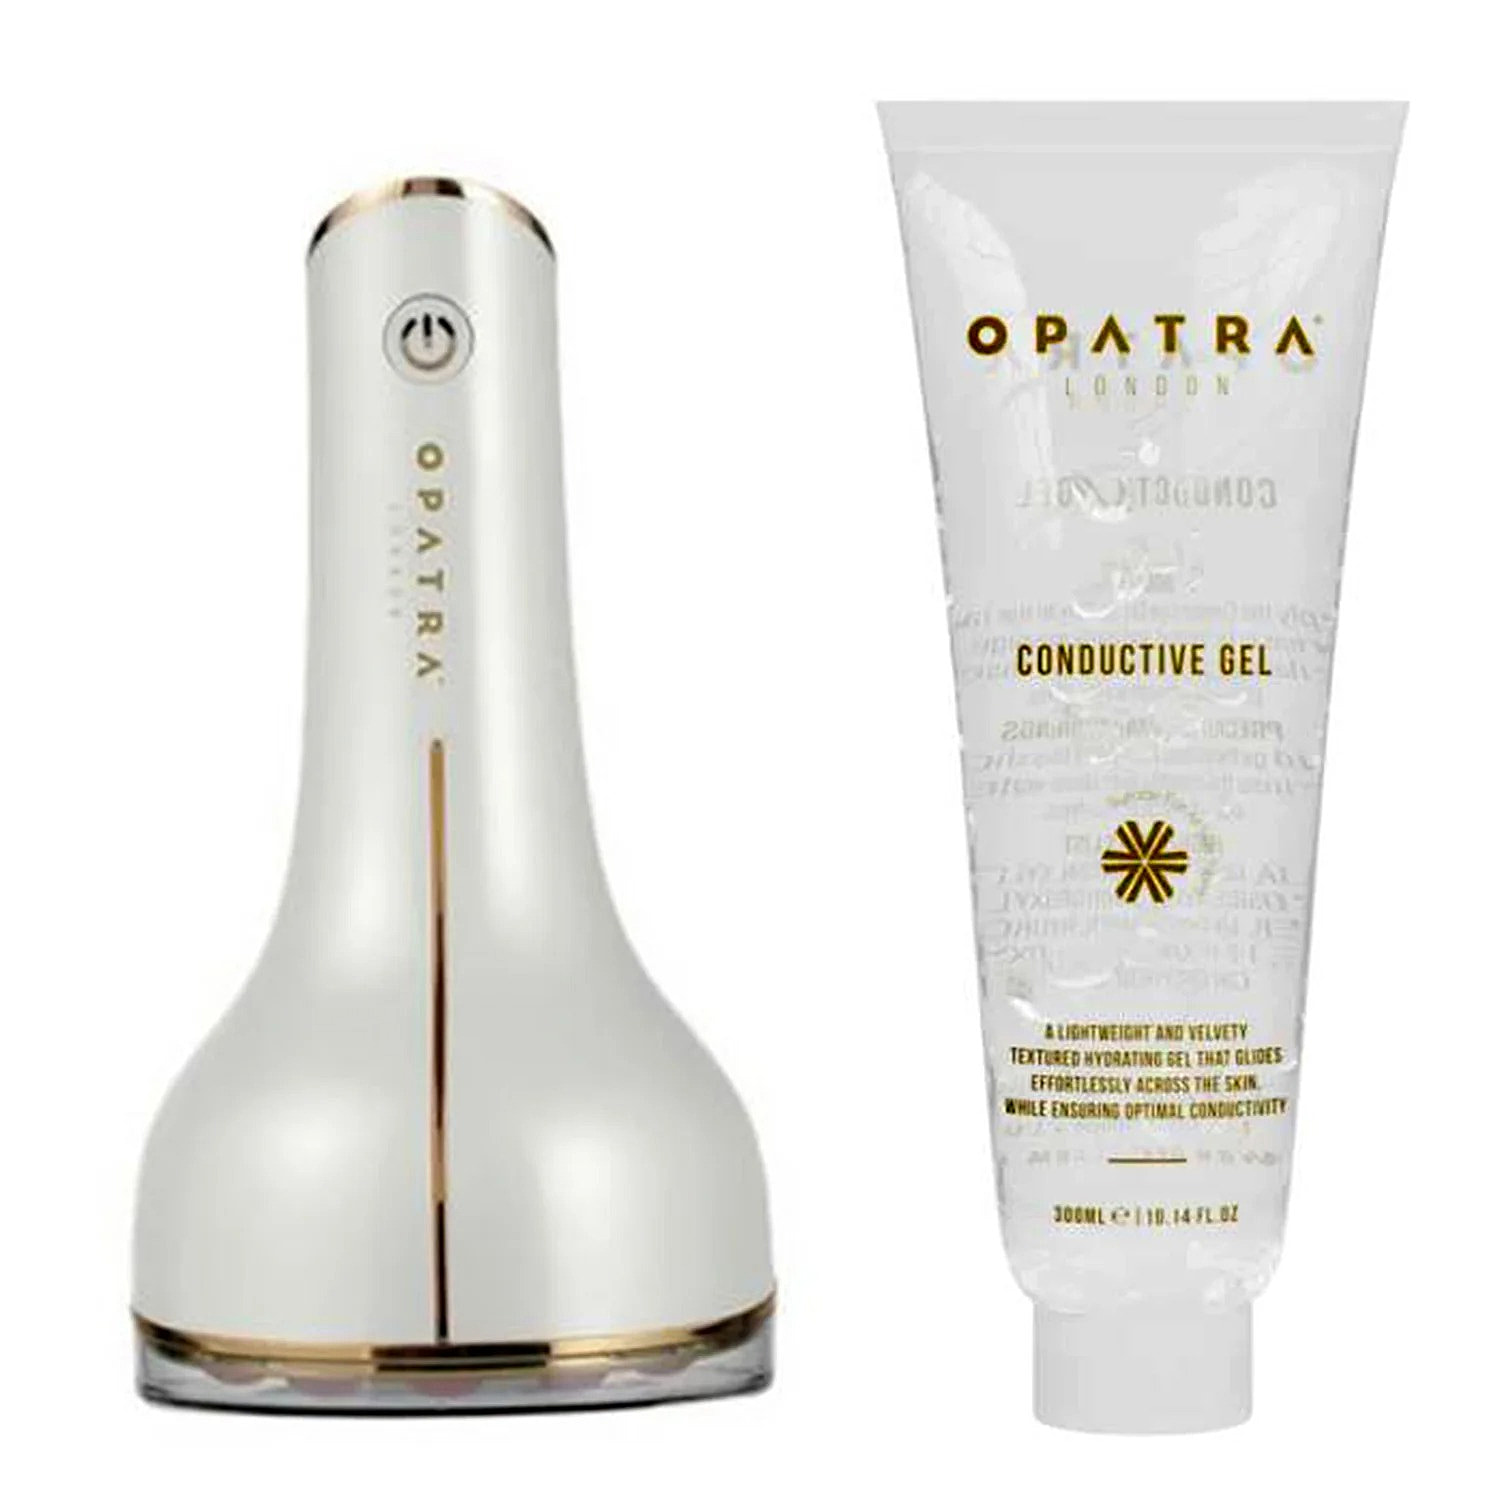 Opatra: Cavi Shaper With Opatra Conductive Gel Smoother, Firmer, and Youthful-Looking Appearance